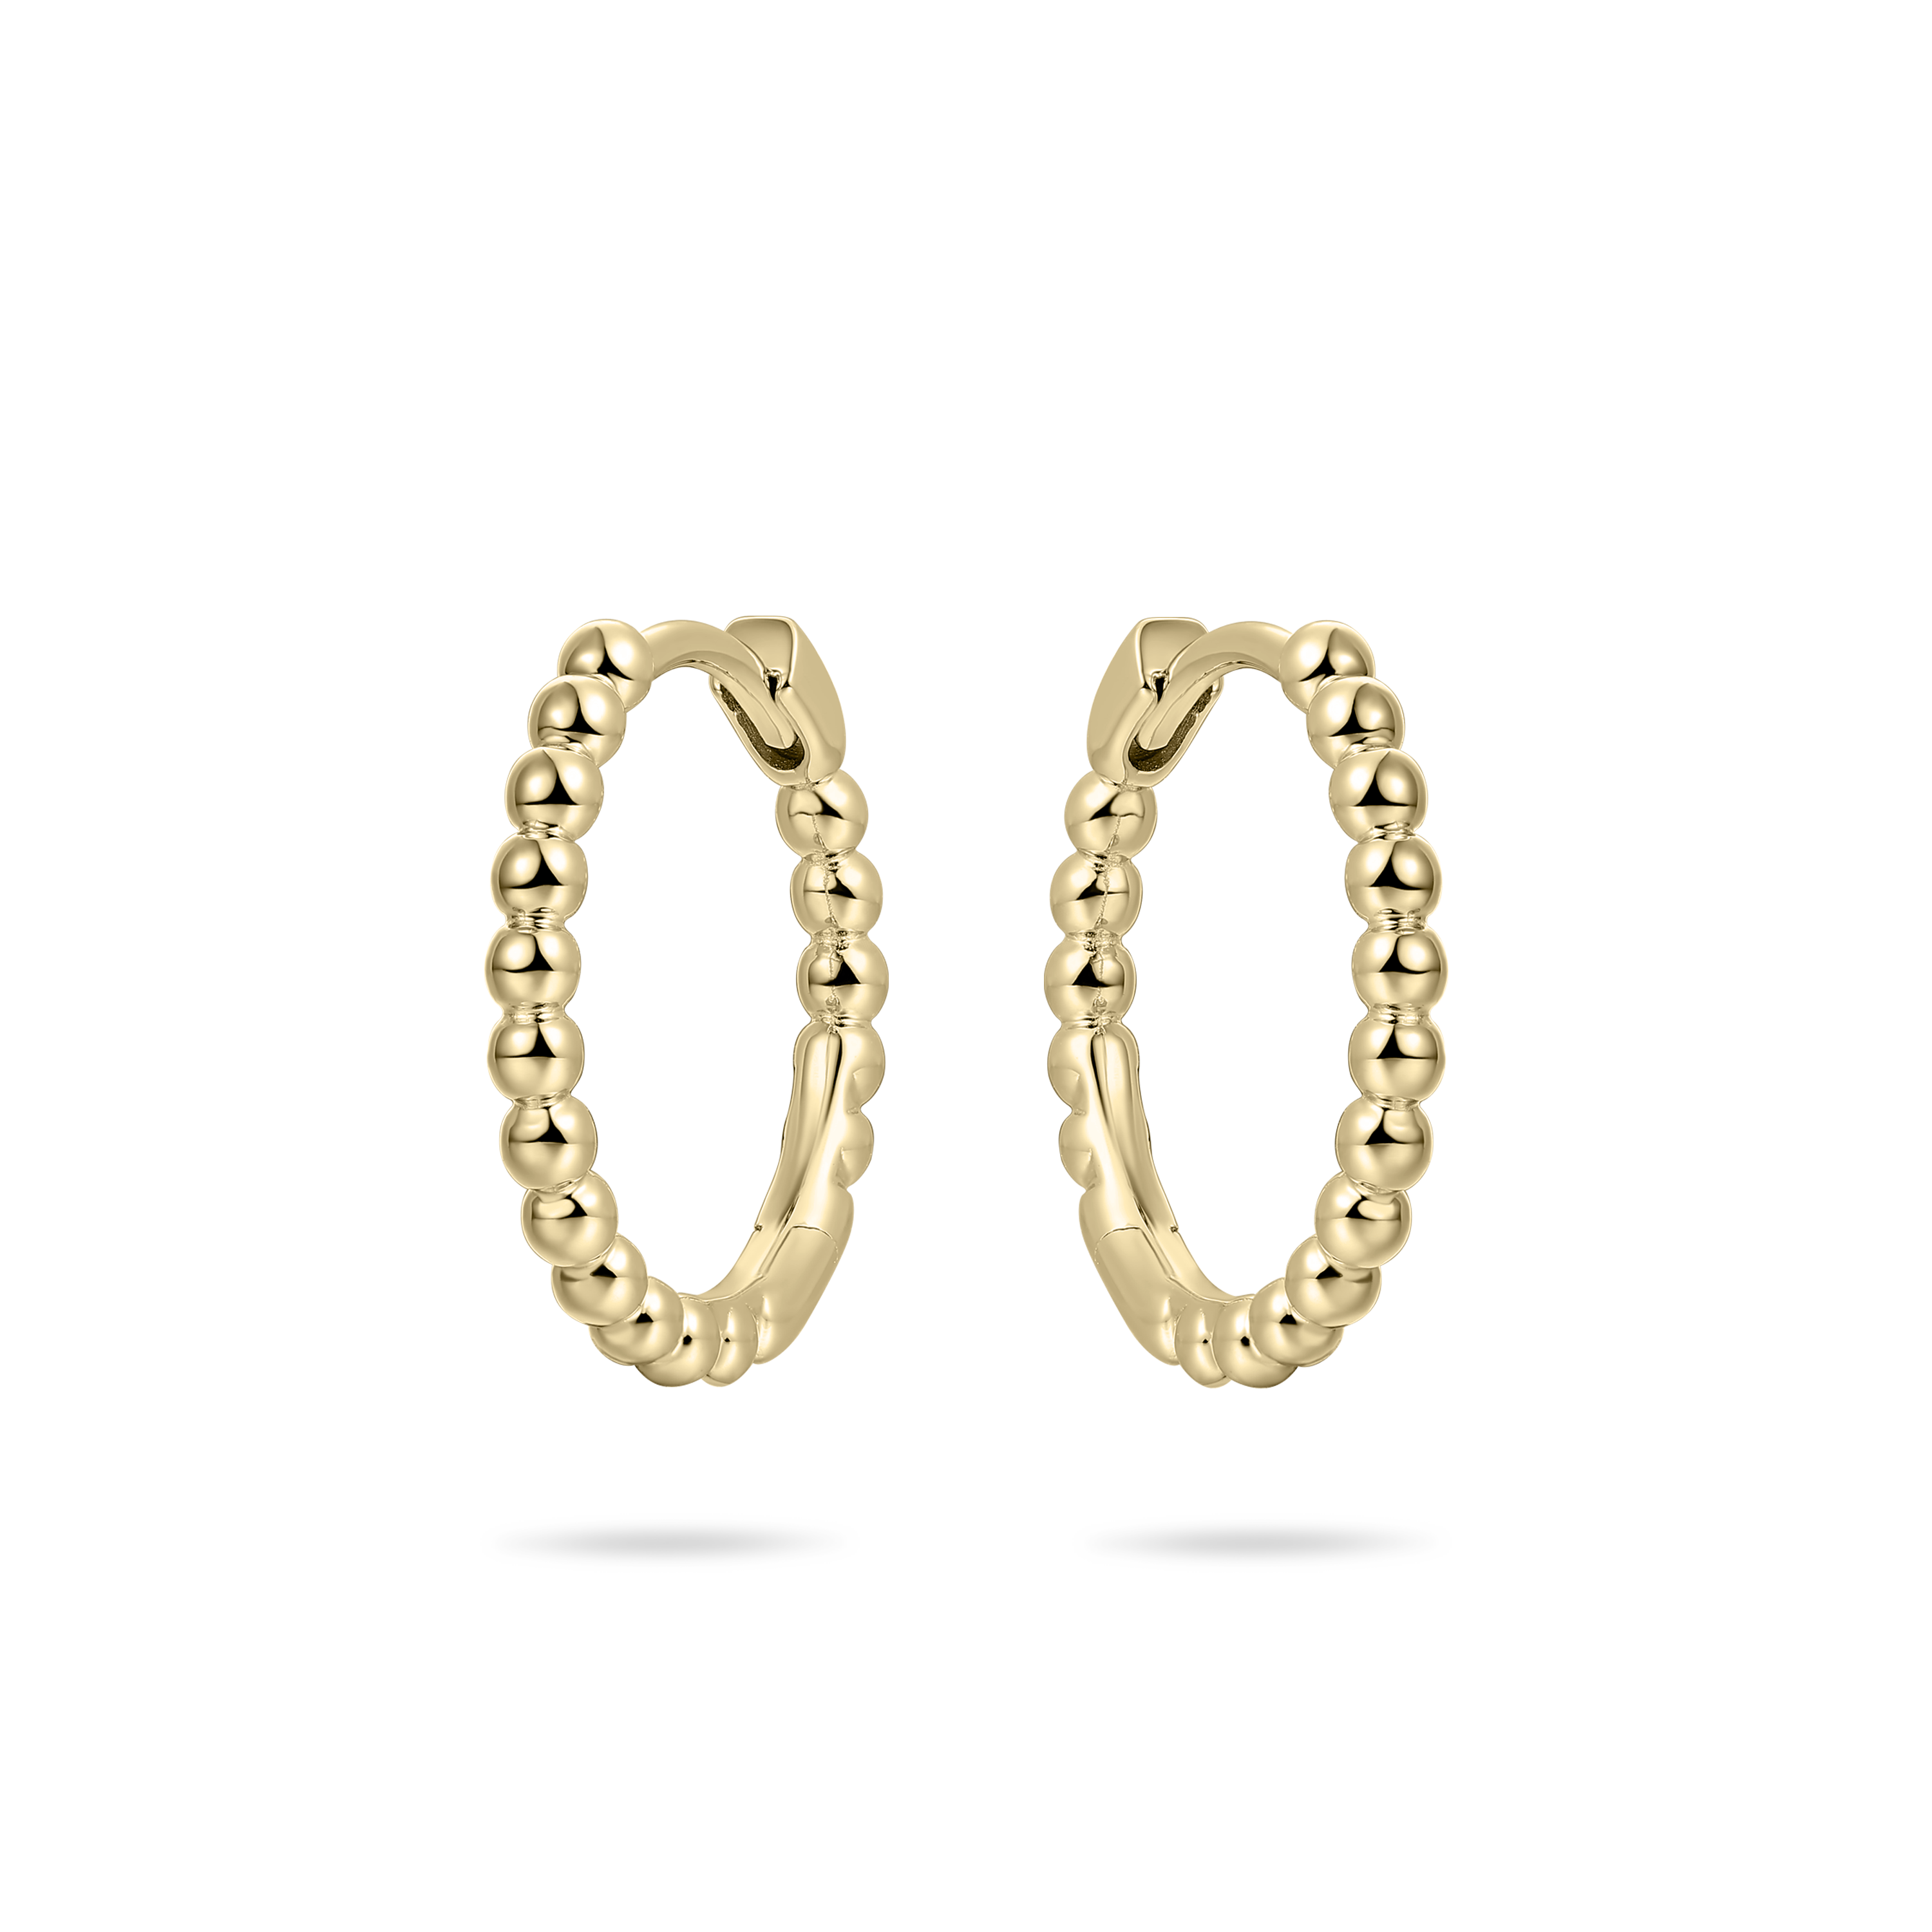 Gisser Jewels Earrings Gold Plated Silver Beaded Hoops